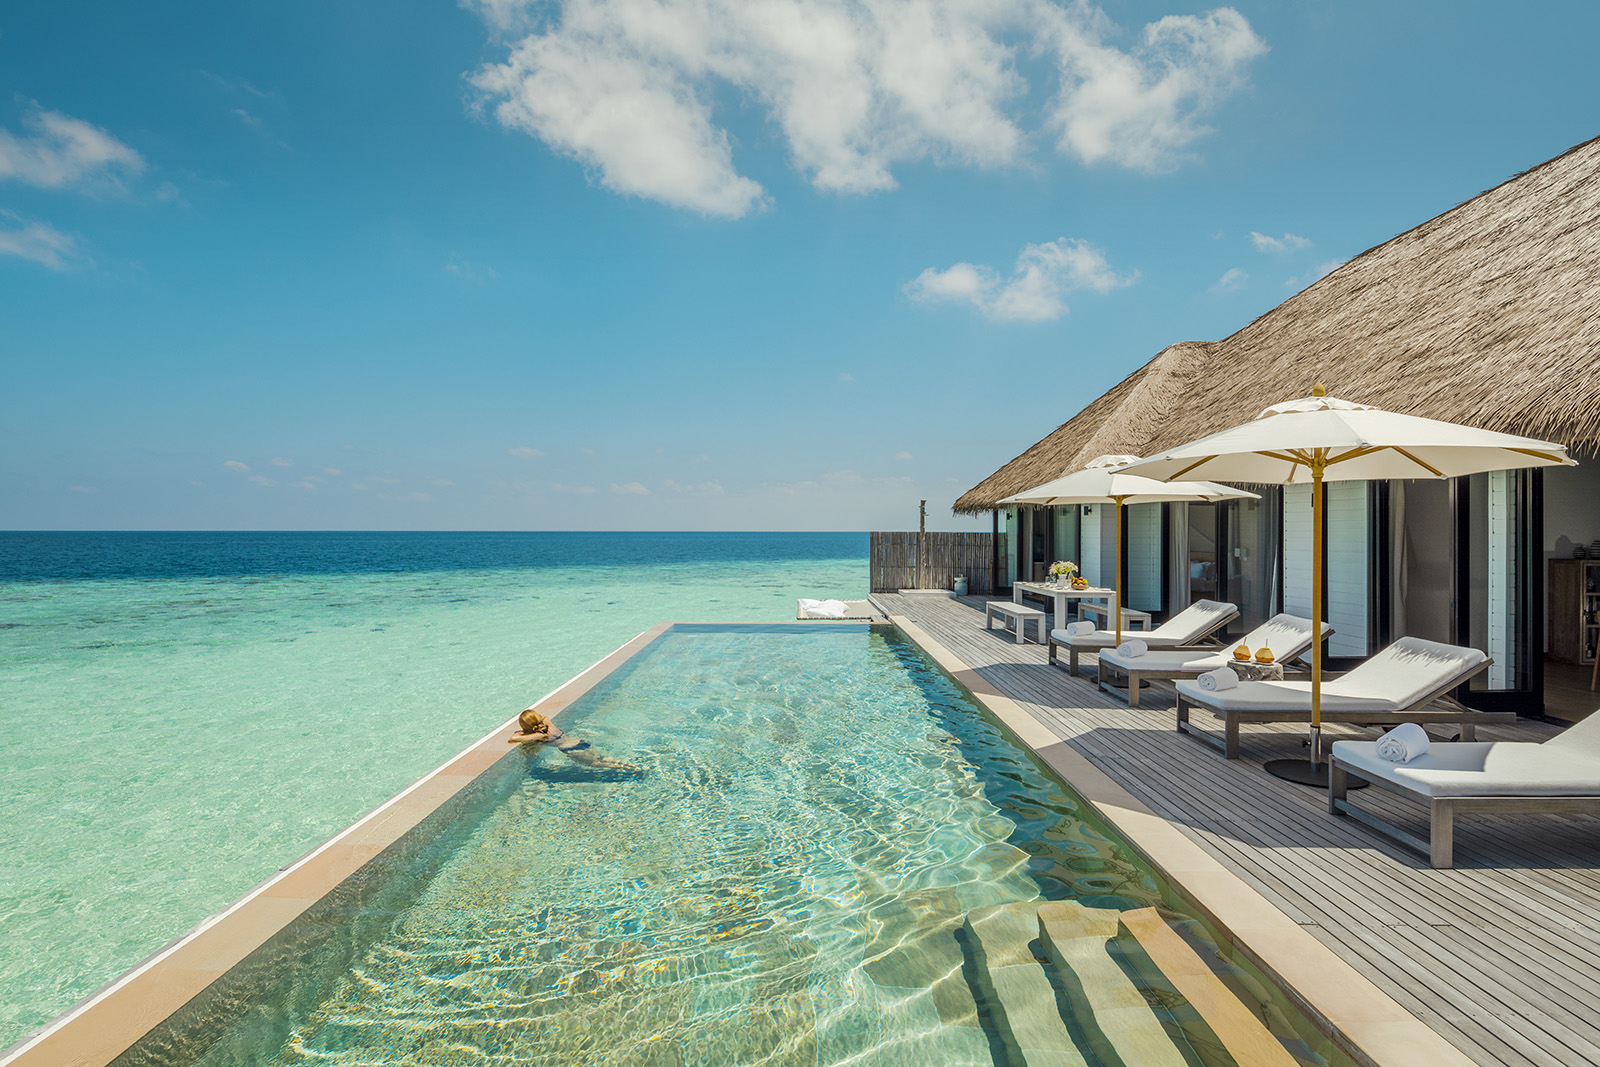 Sunbathing from an oceanfront suite at The Ritz-Carlton Maldives, Fari Islands